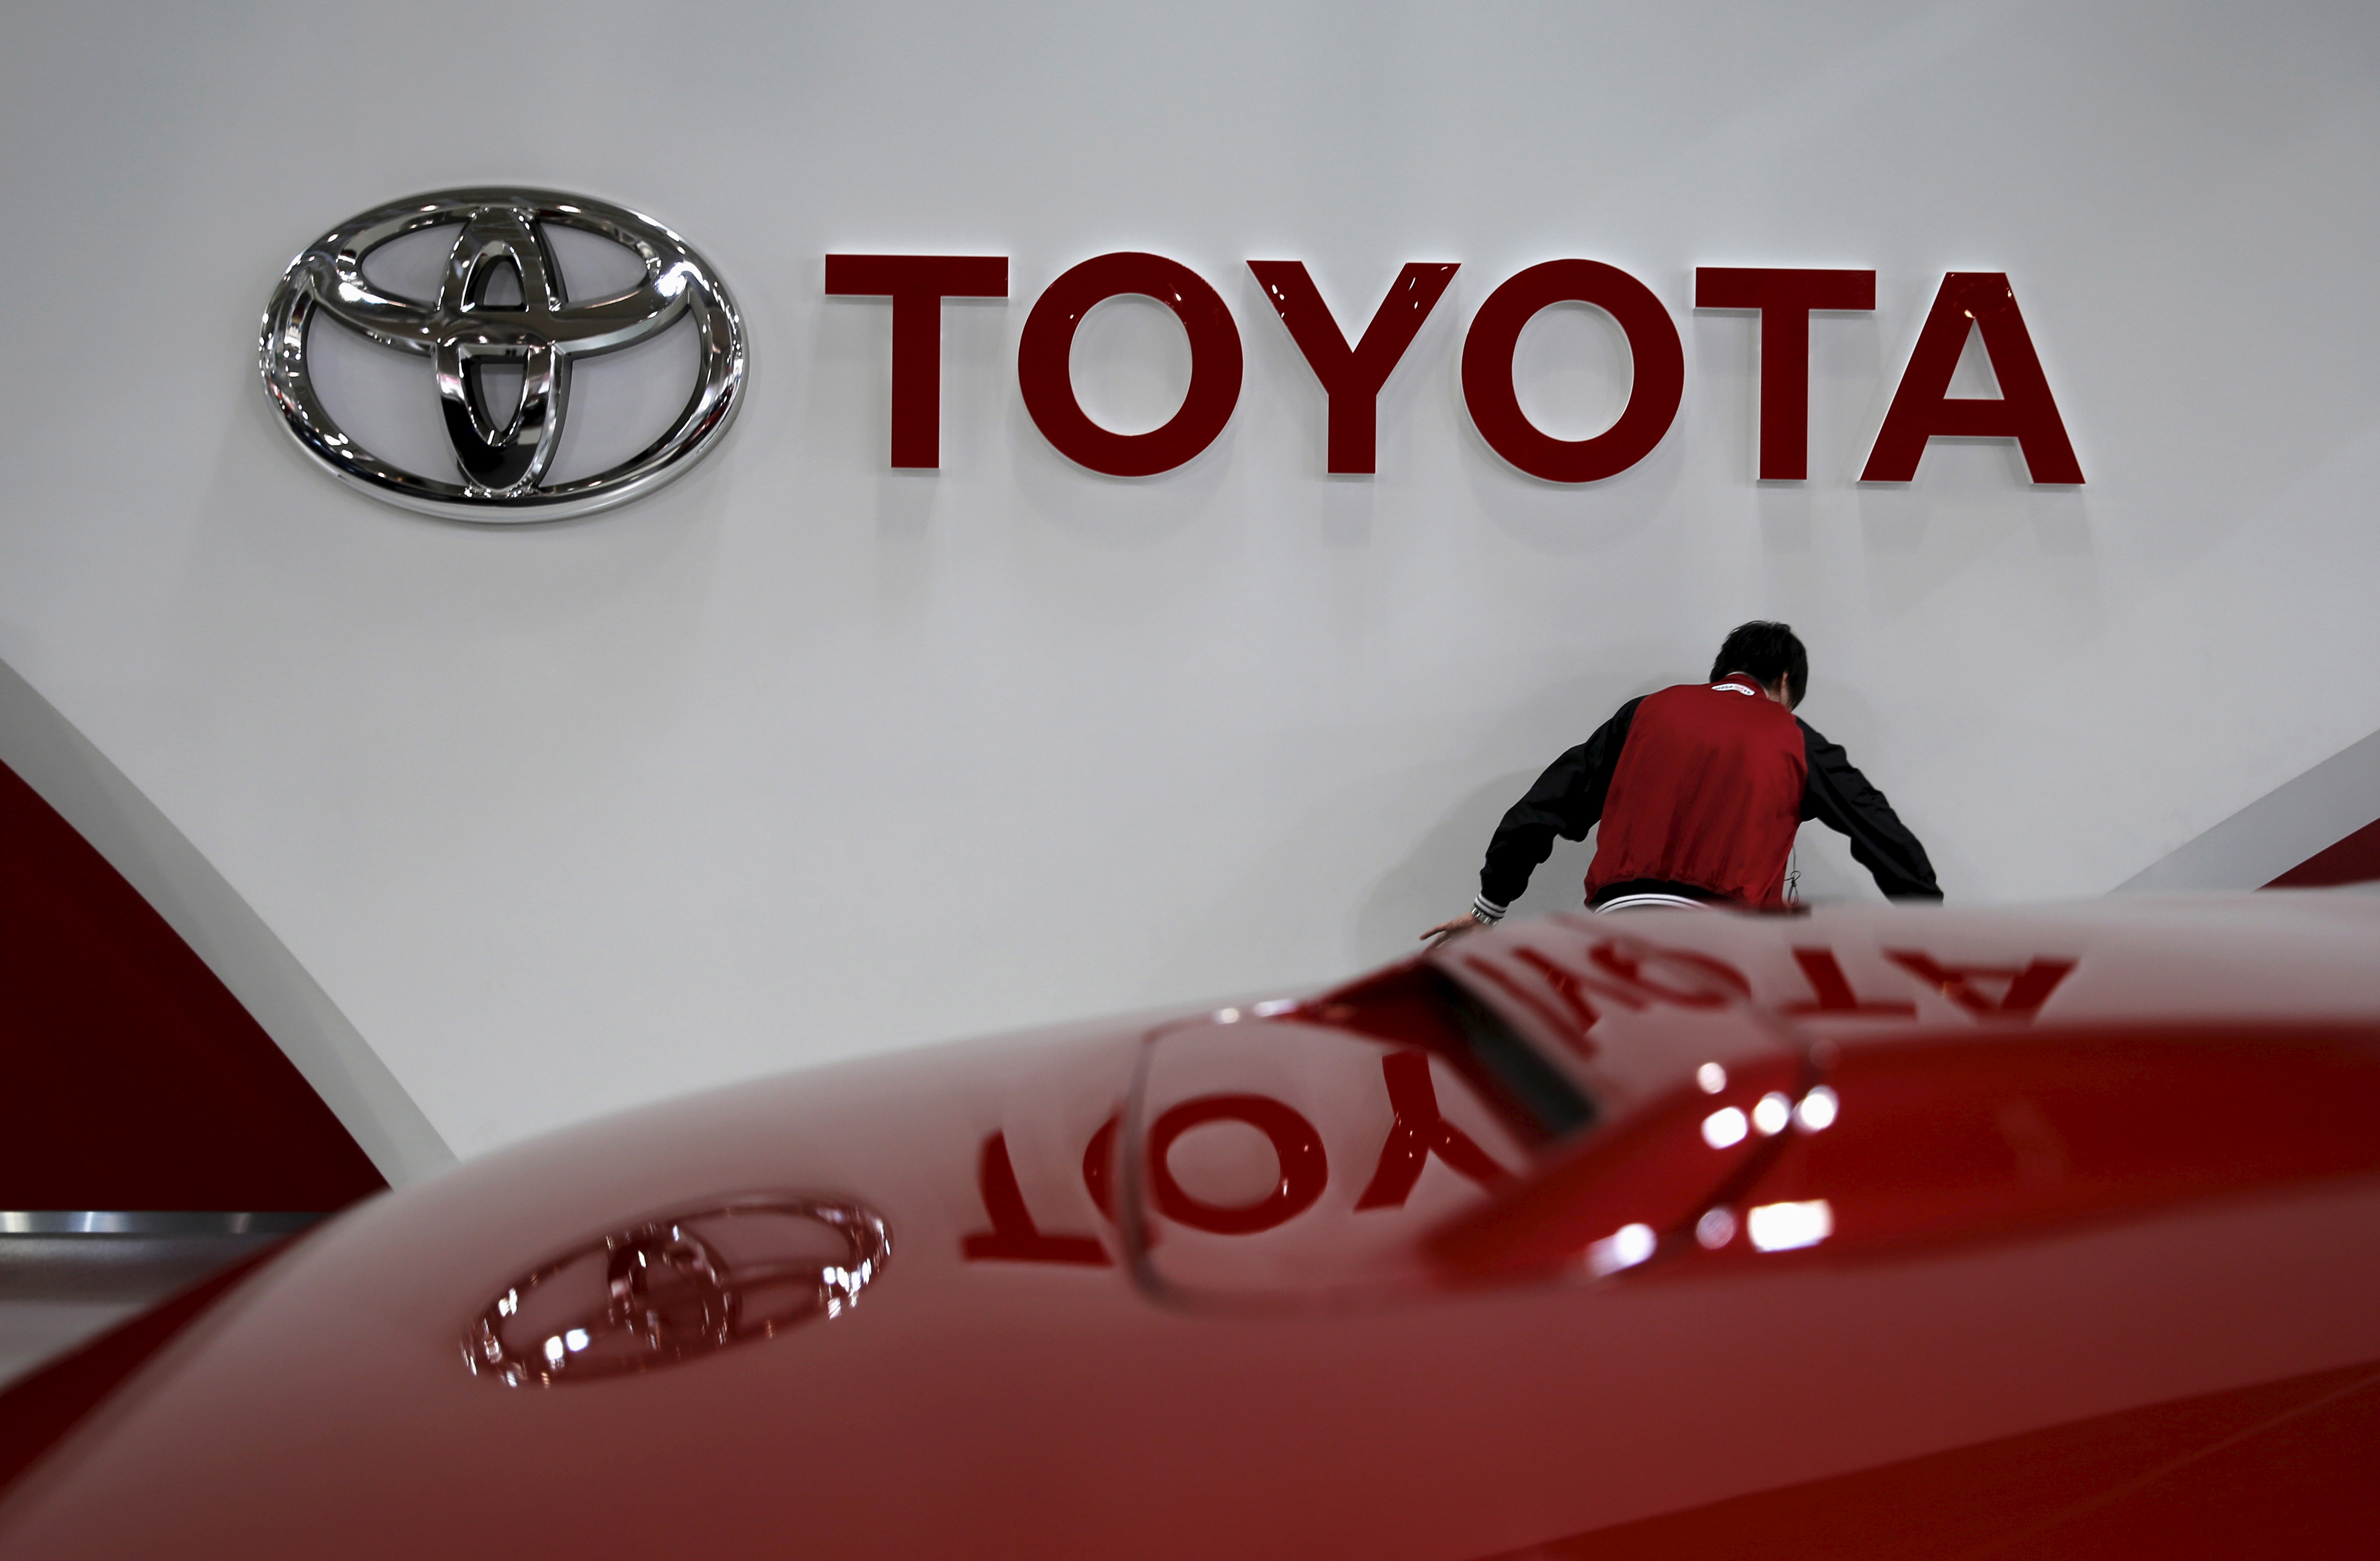 An employee works under a Toyota Motor Corp logo at the company's showroom in Tokyo